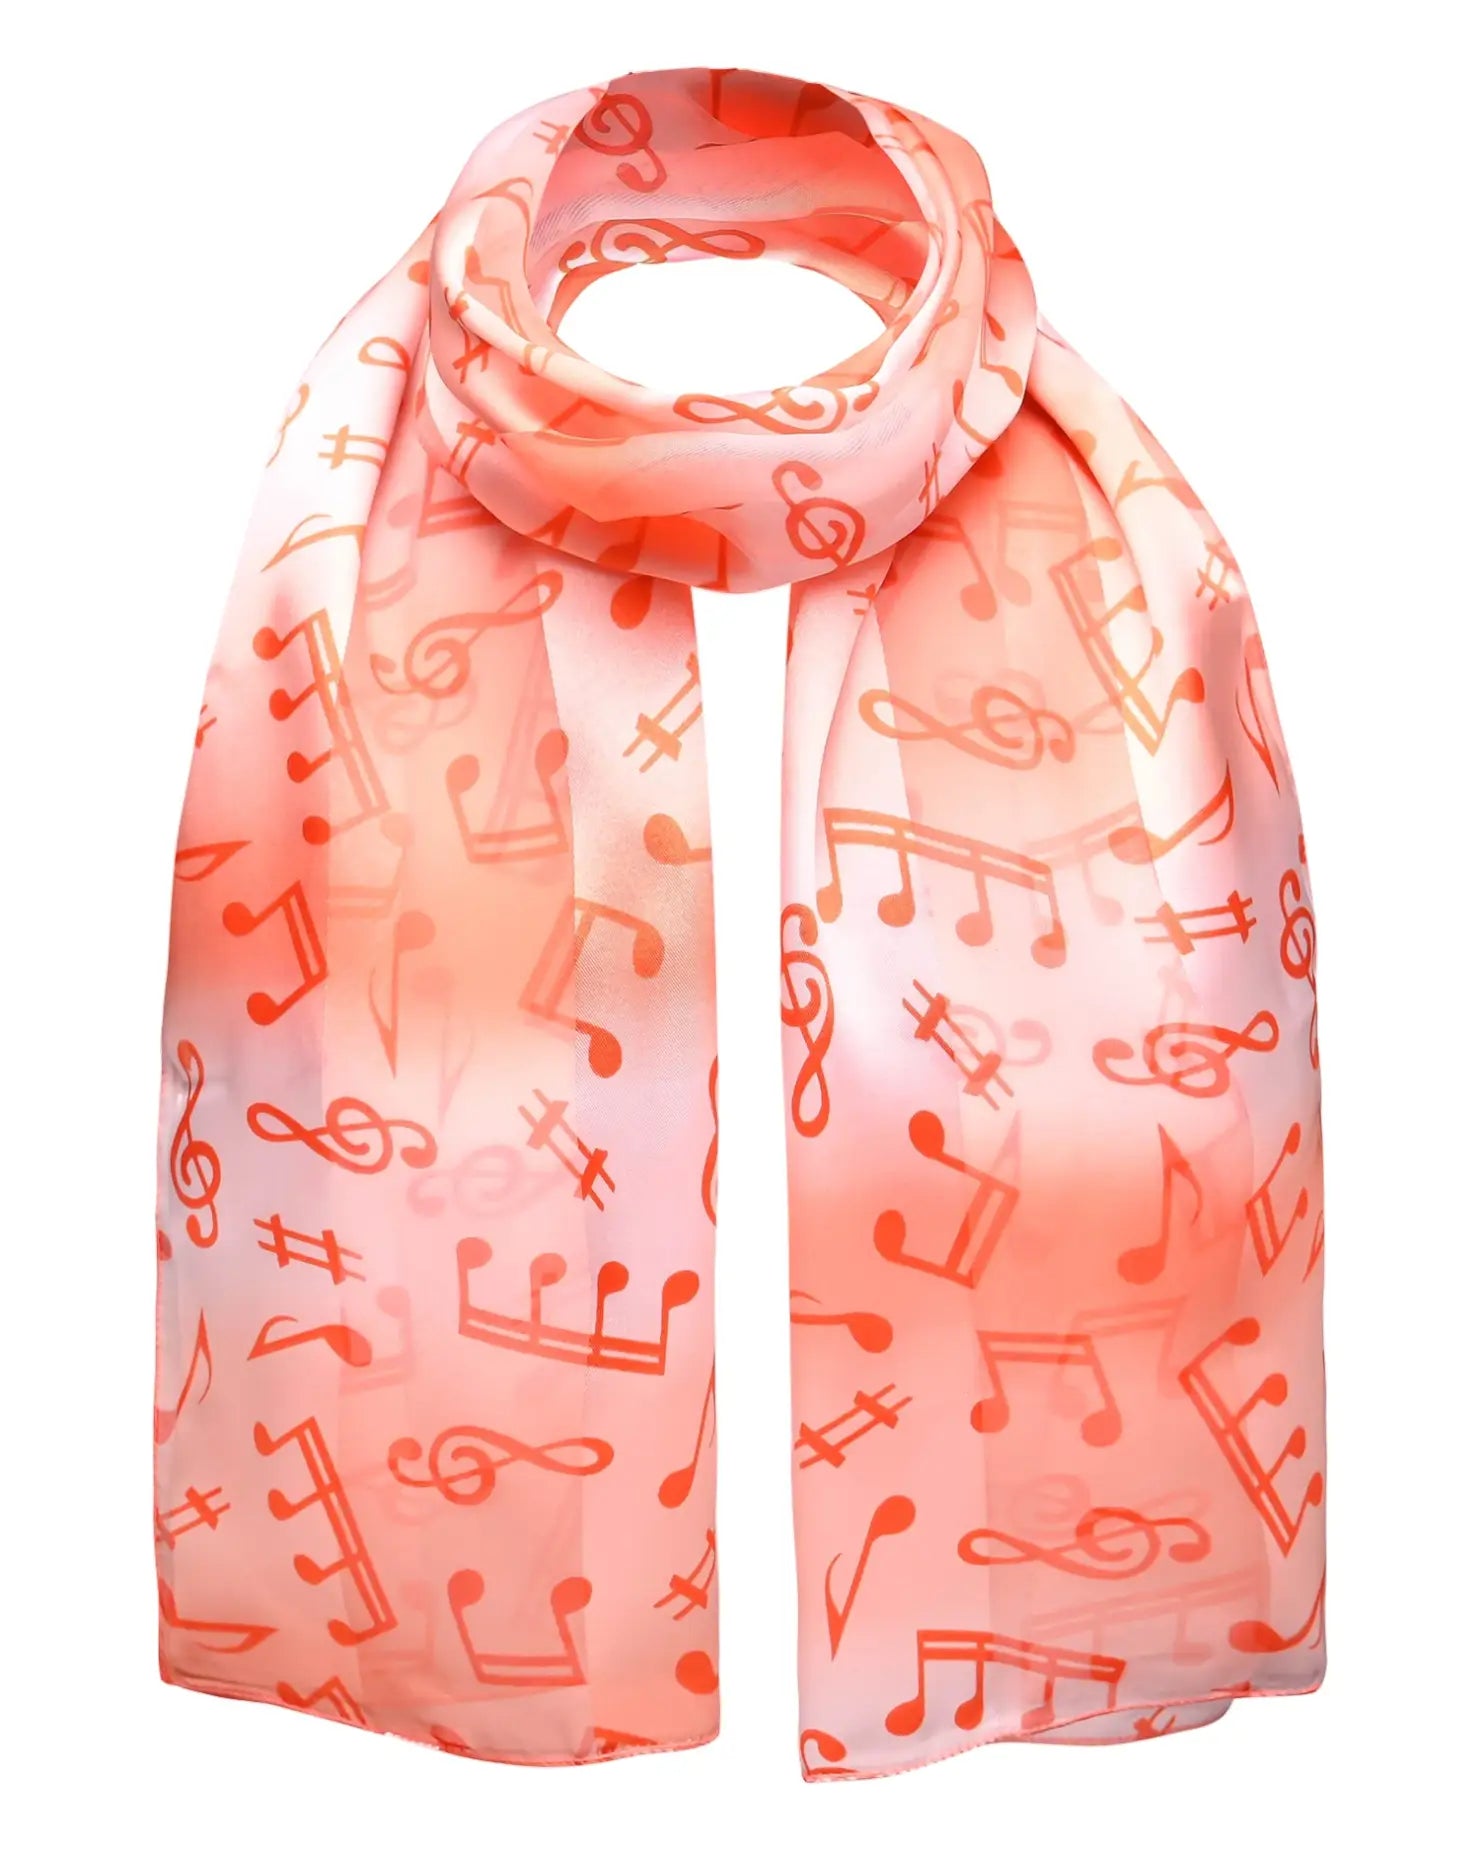 Musical note satin stripe scarf with music notes design.